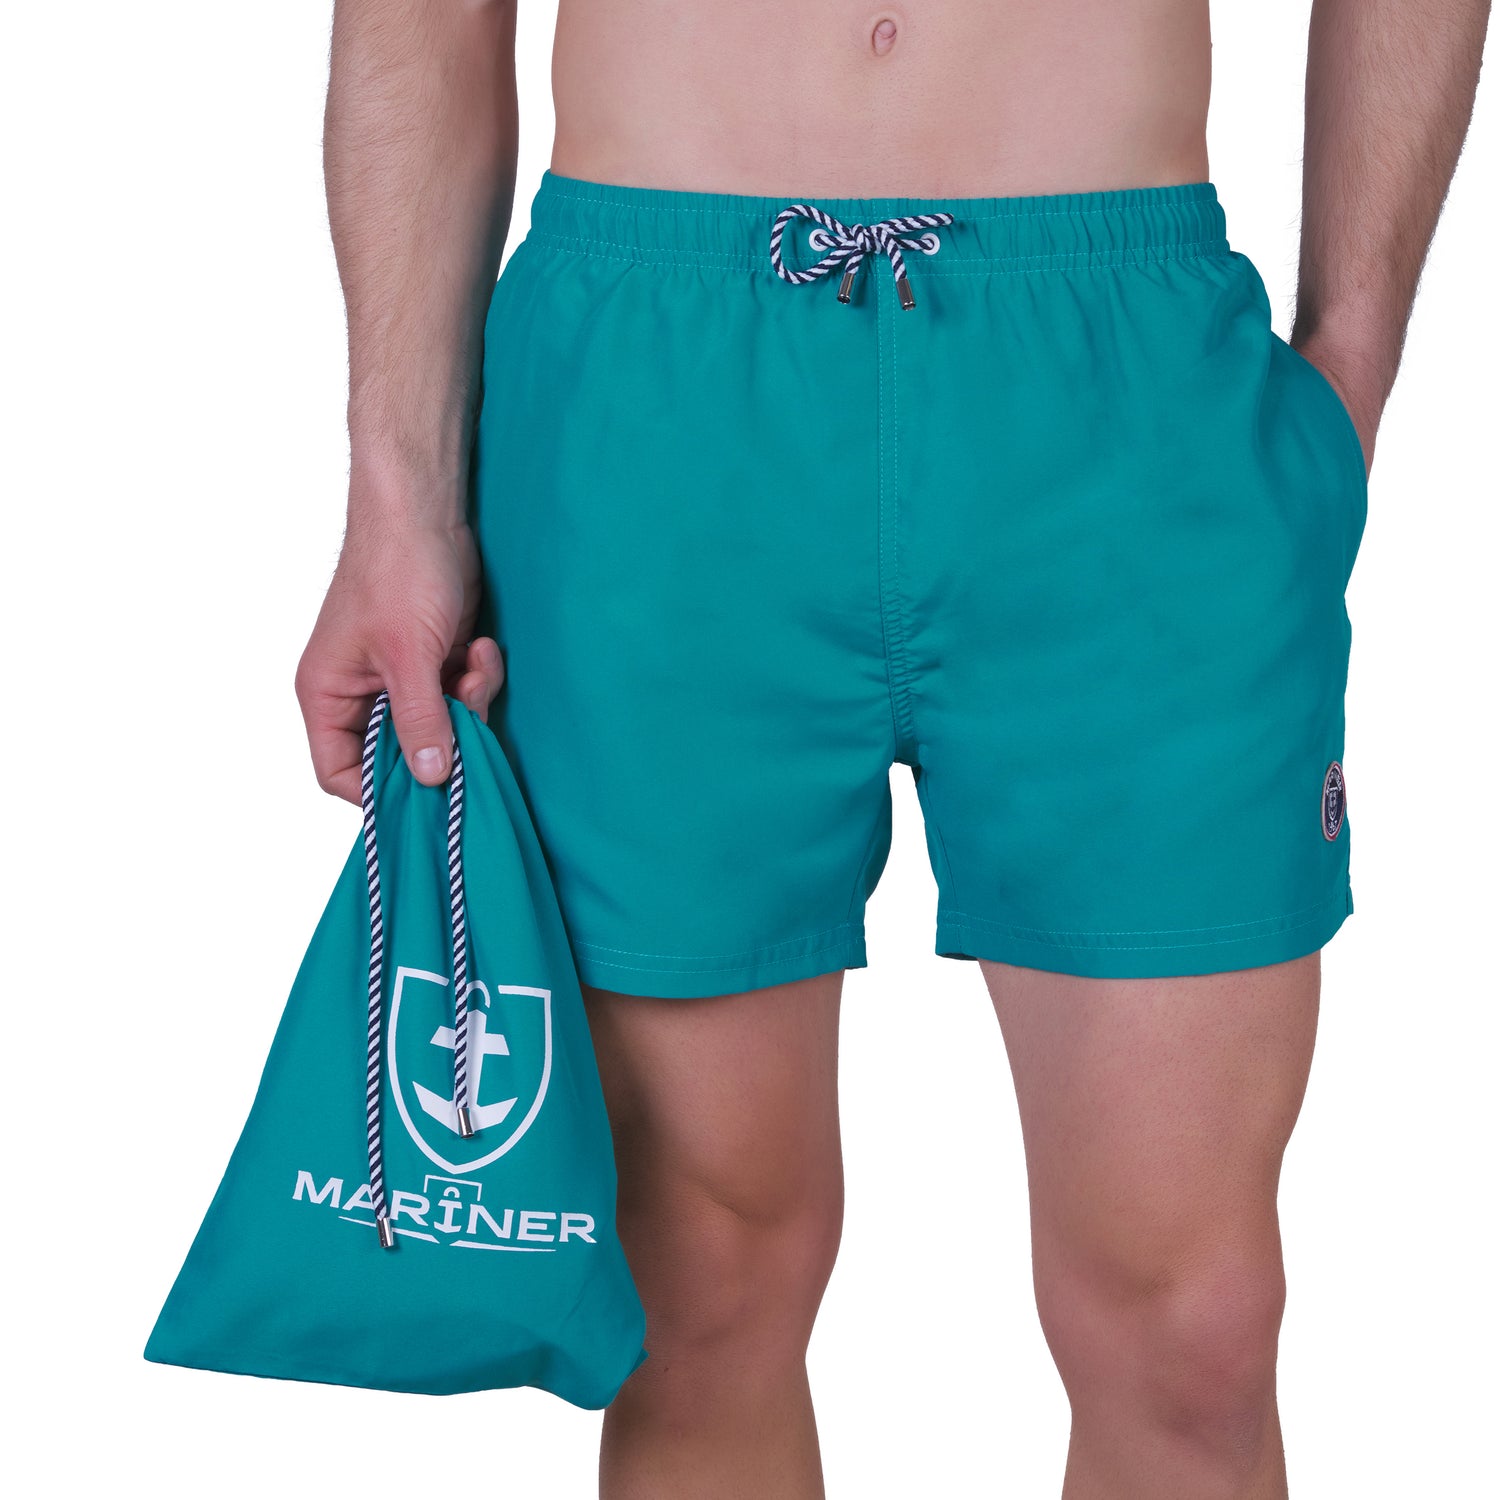 Swim shorts with mesh lining, GREEN. With travel pouch!